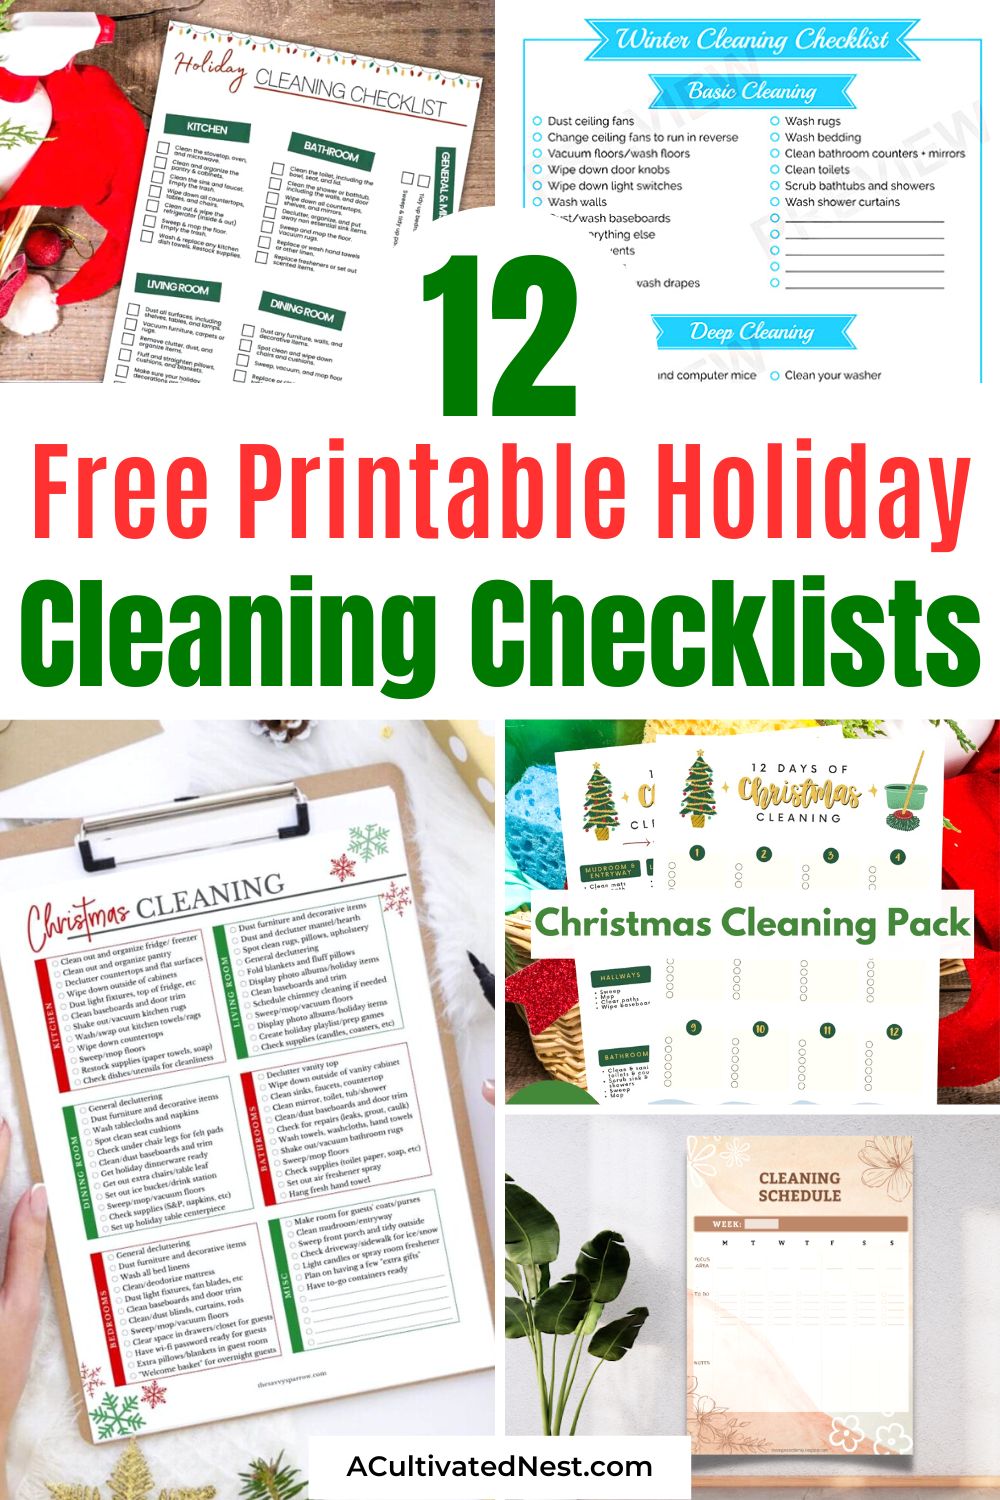 12 Free Printable Holiday Cleaning Checklists- Tackle your holiday cleaning like a pro with our collection of free printable holiday cleaning checklists! Enjoy a sparkling and stress-free home for the holidays. | #CleaningChecklists #HolidayPrep #cleaningChecklists #freePrintables #ACultivatedNest